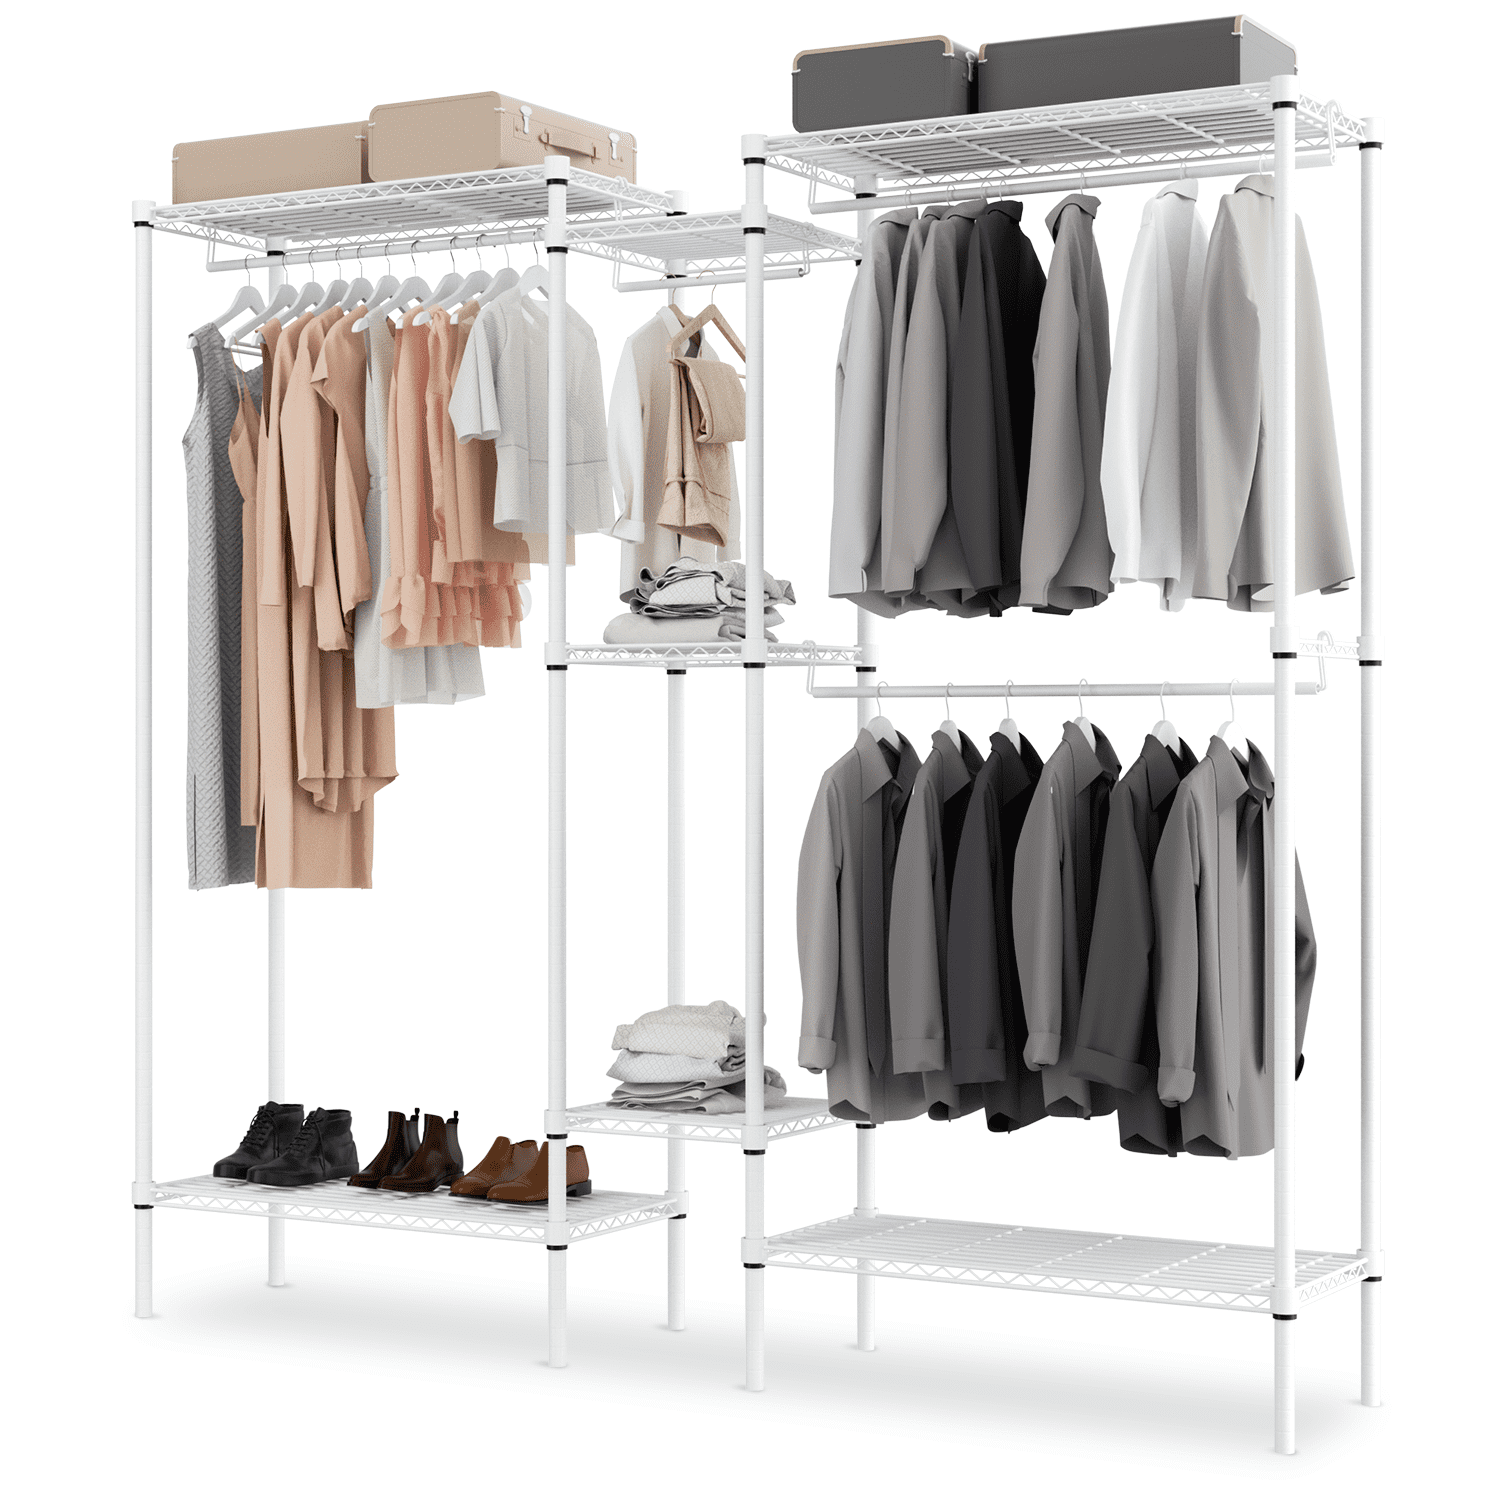 Molloy Industrial Corner Clothes Rack, L Shaped Garment Rack with Shelves and 2 Fabric Drawers, Heavy Duty Clothing Rack for Hanging Clothes Trent aus